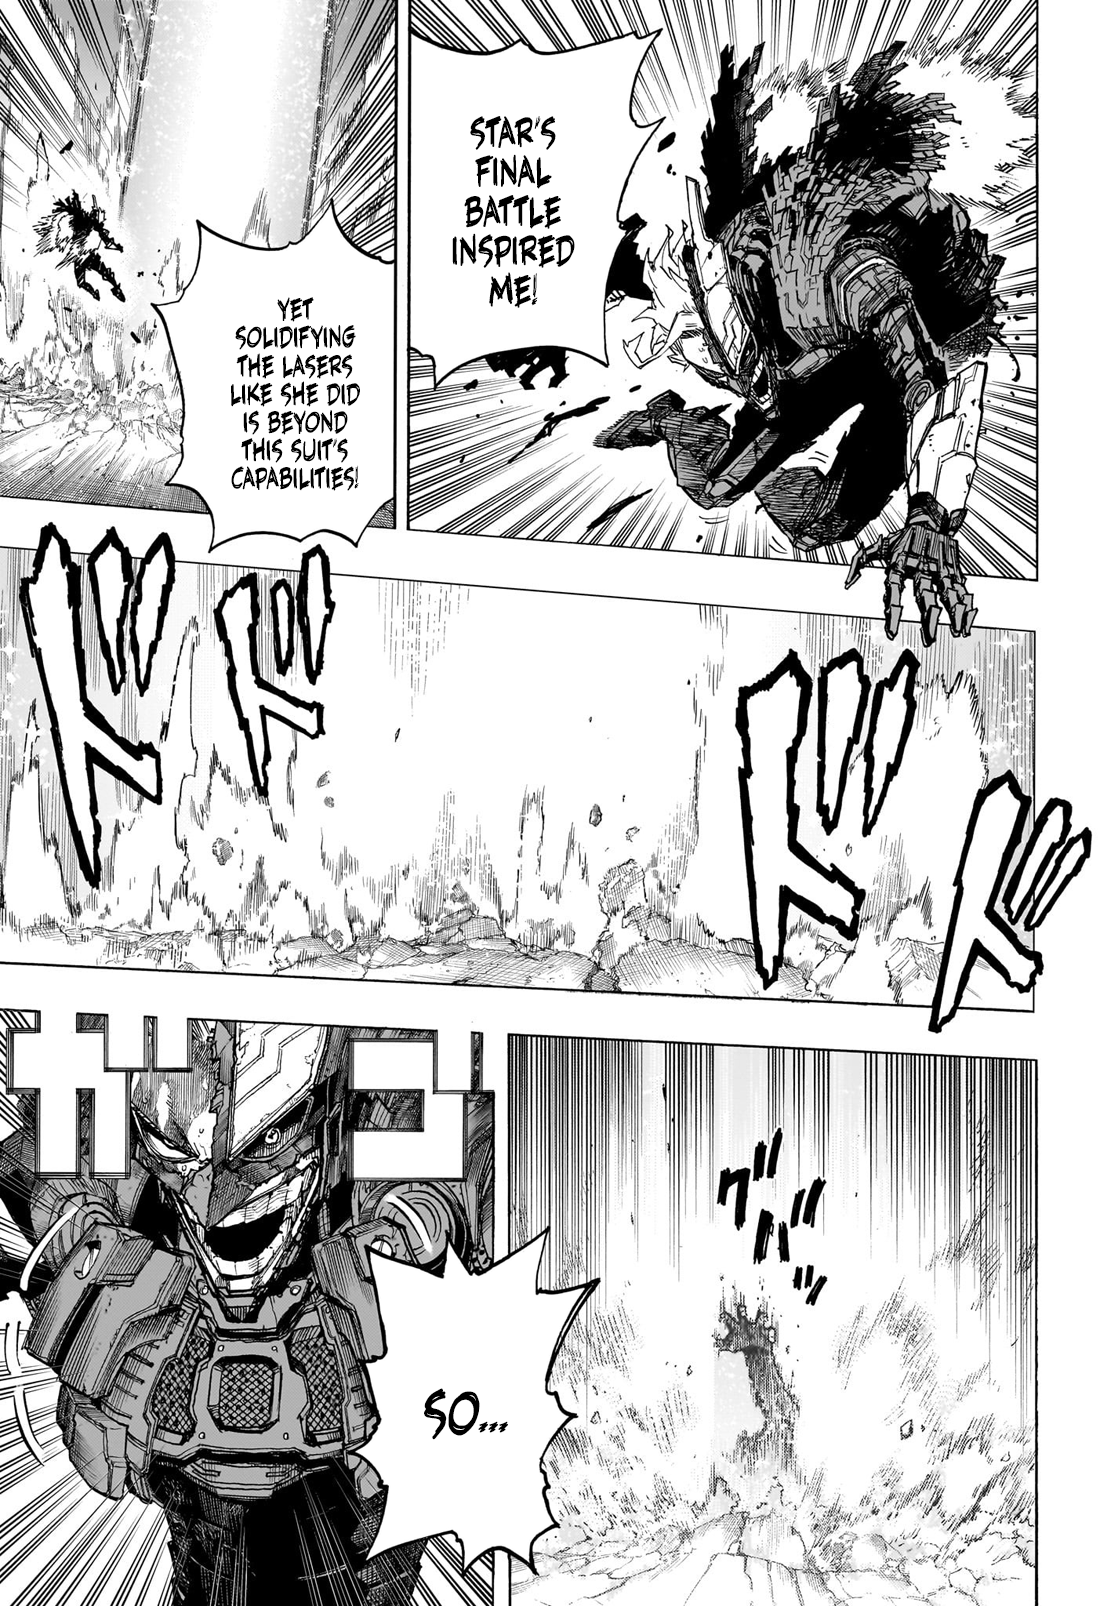 My Hero Academia, Chapter 400  TcbScans Org - Free Manga Online in High  Quality